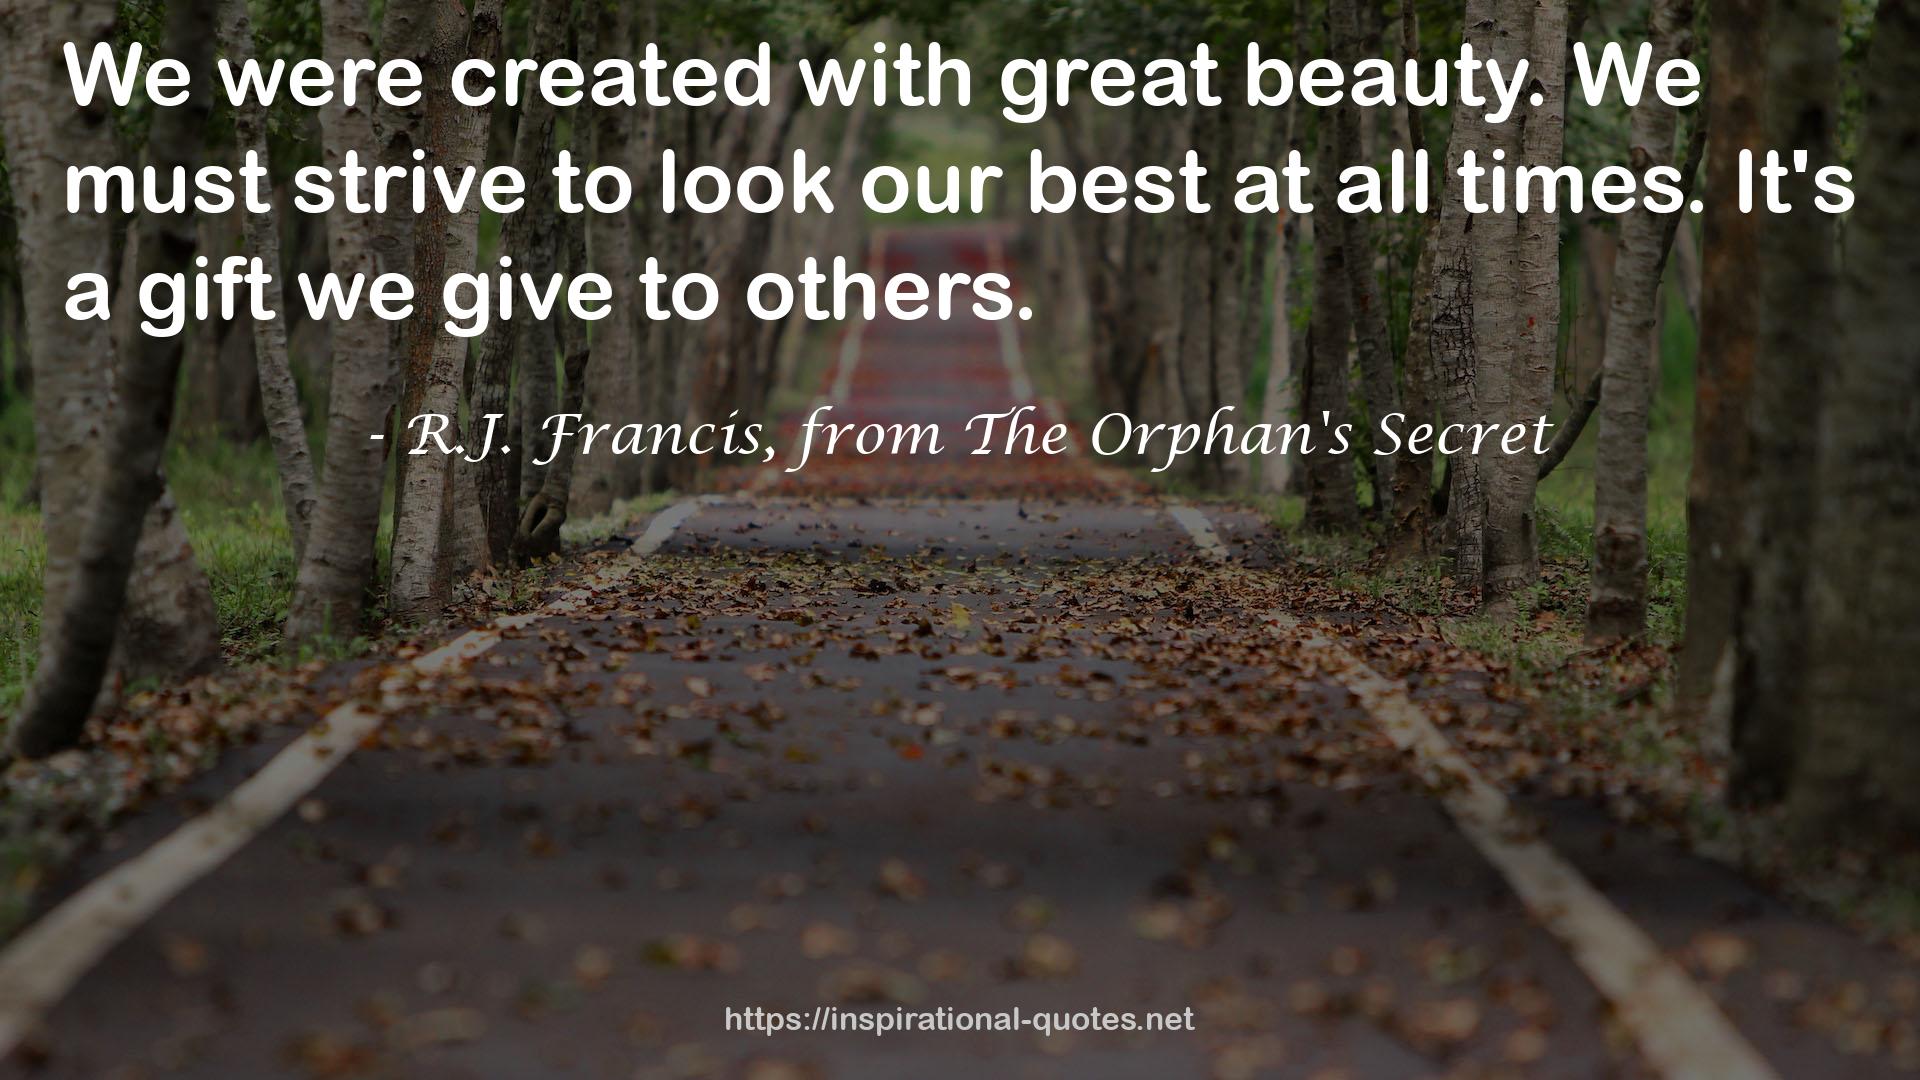 R.J. Francis, from The Orphan's Secret QUOTES